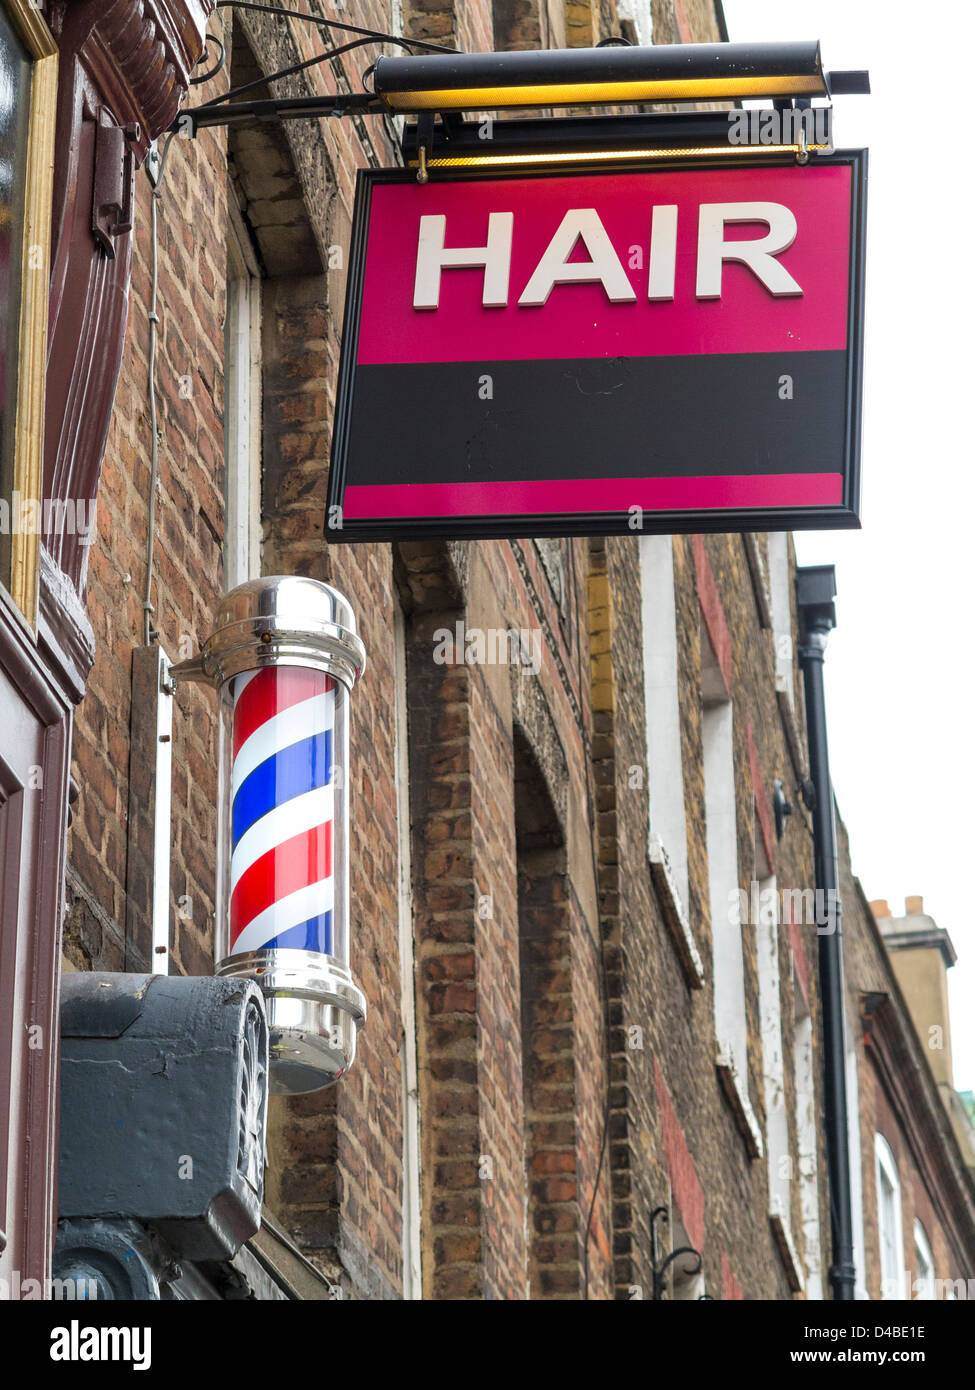 Barbers in London with Hair sign and barber's striped pole, London, England Stock Photo